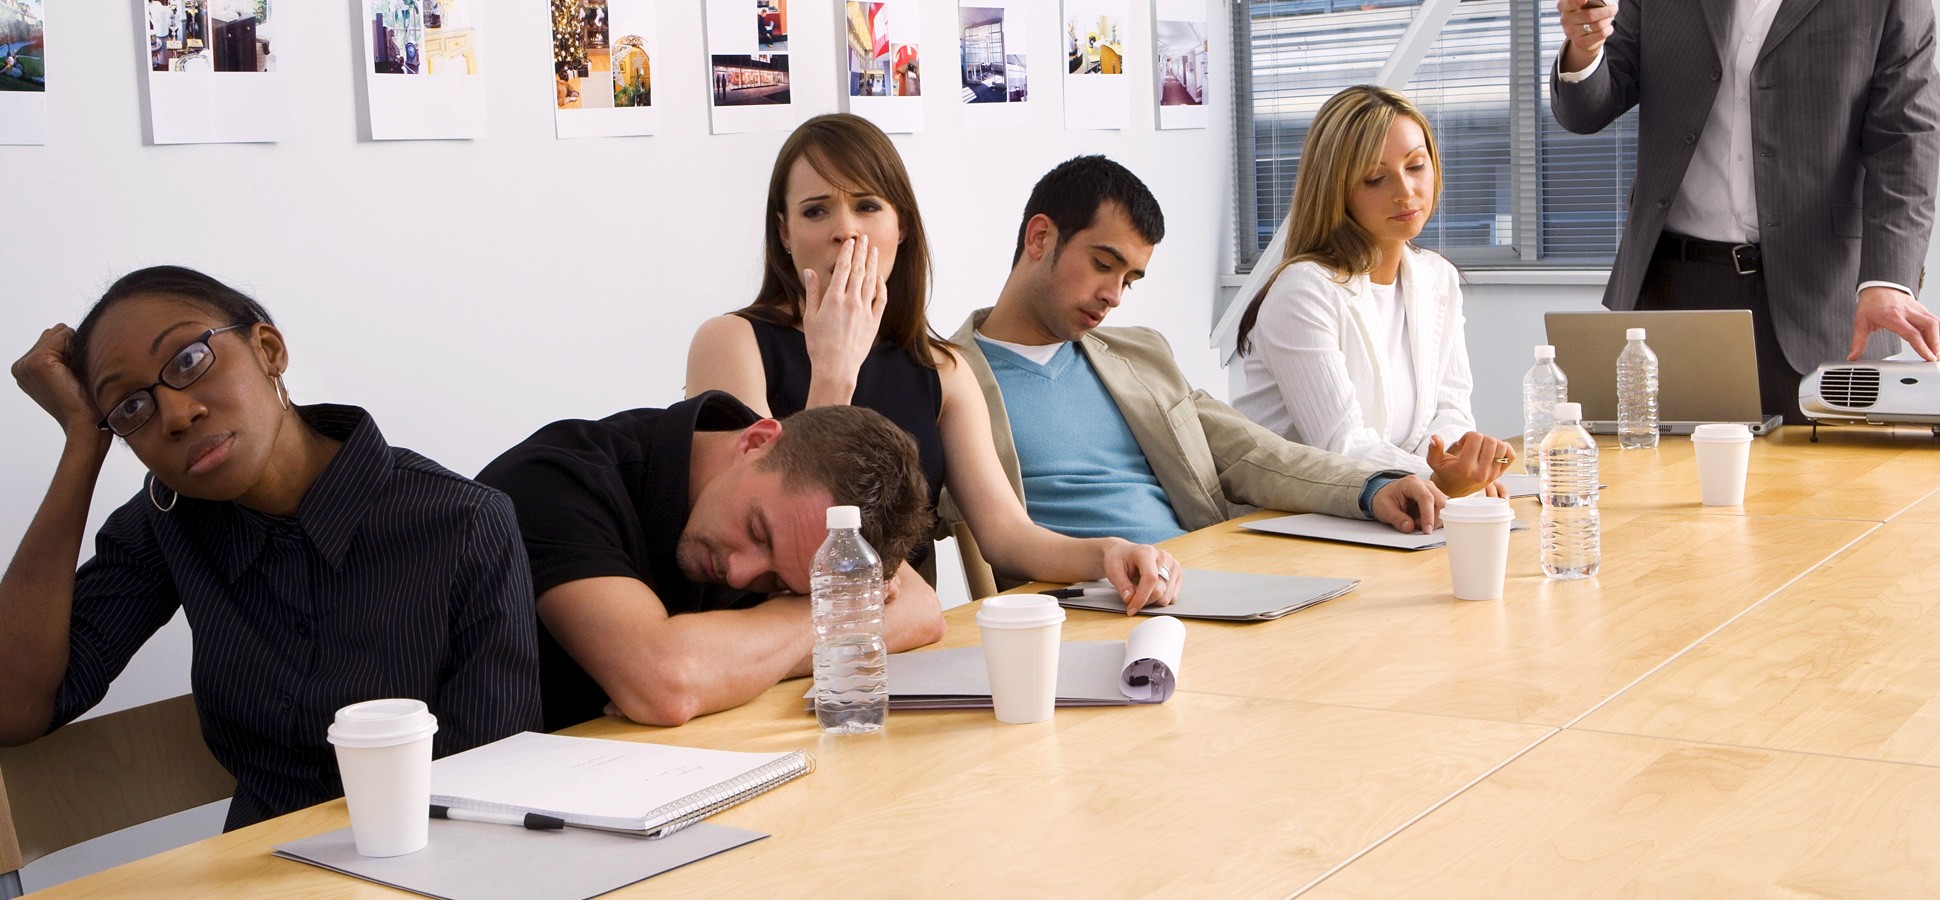 bored-employees-in-presentation-1940x900_29877